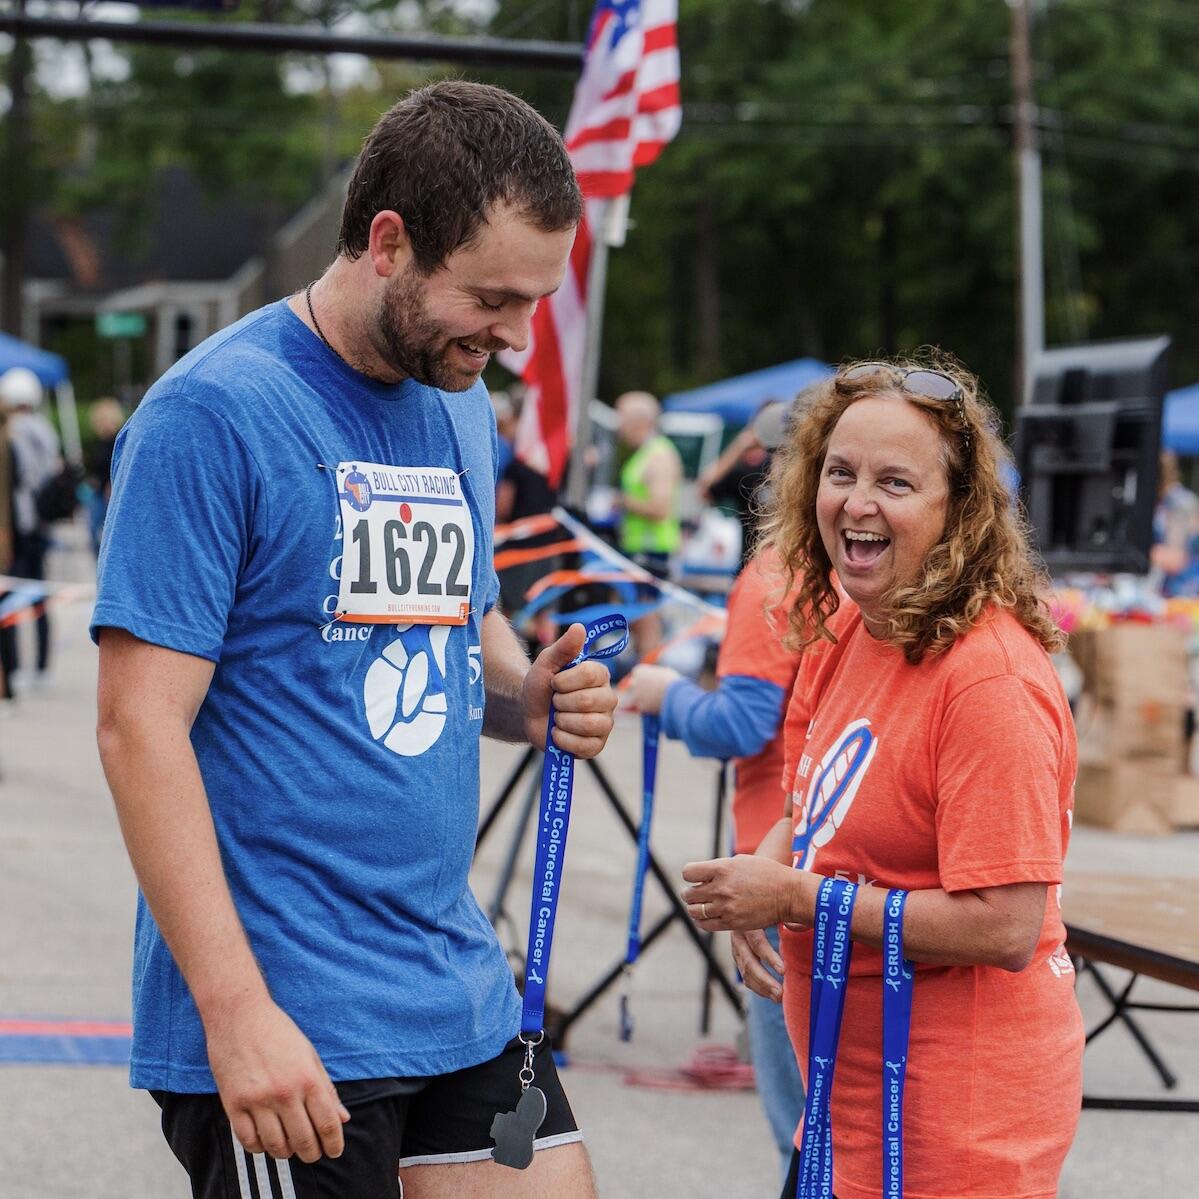 man with a blue CRUSH t-shirt and race bib receives a medal from a woman in an orange CRUSH t-shirt. Both are smiling.